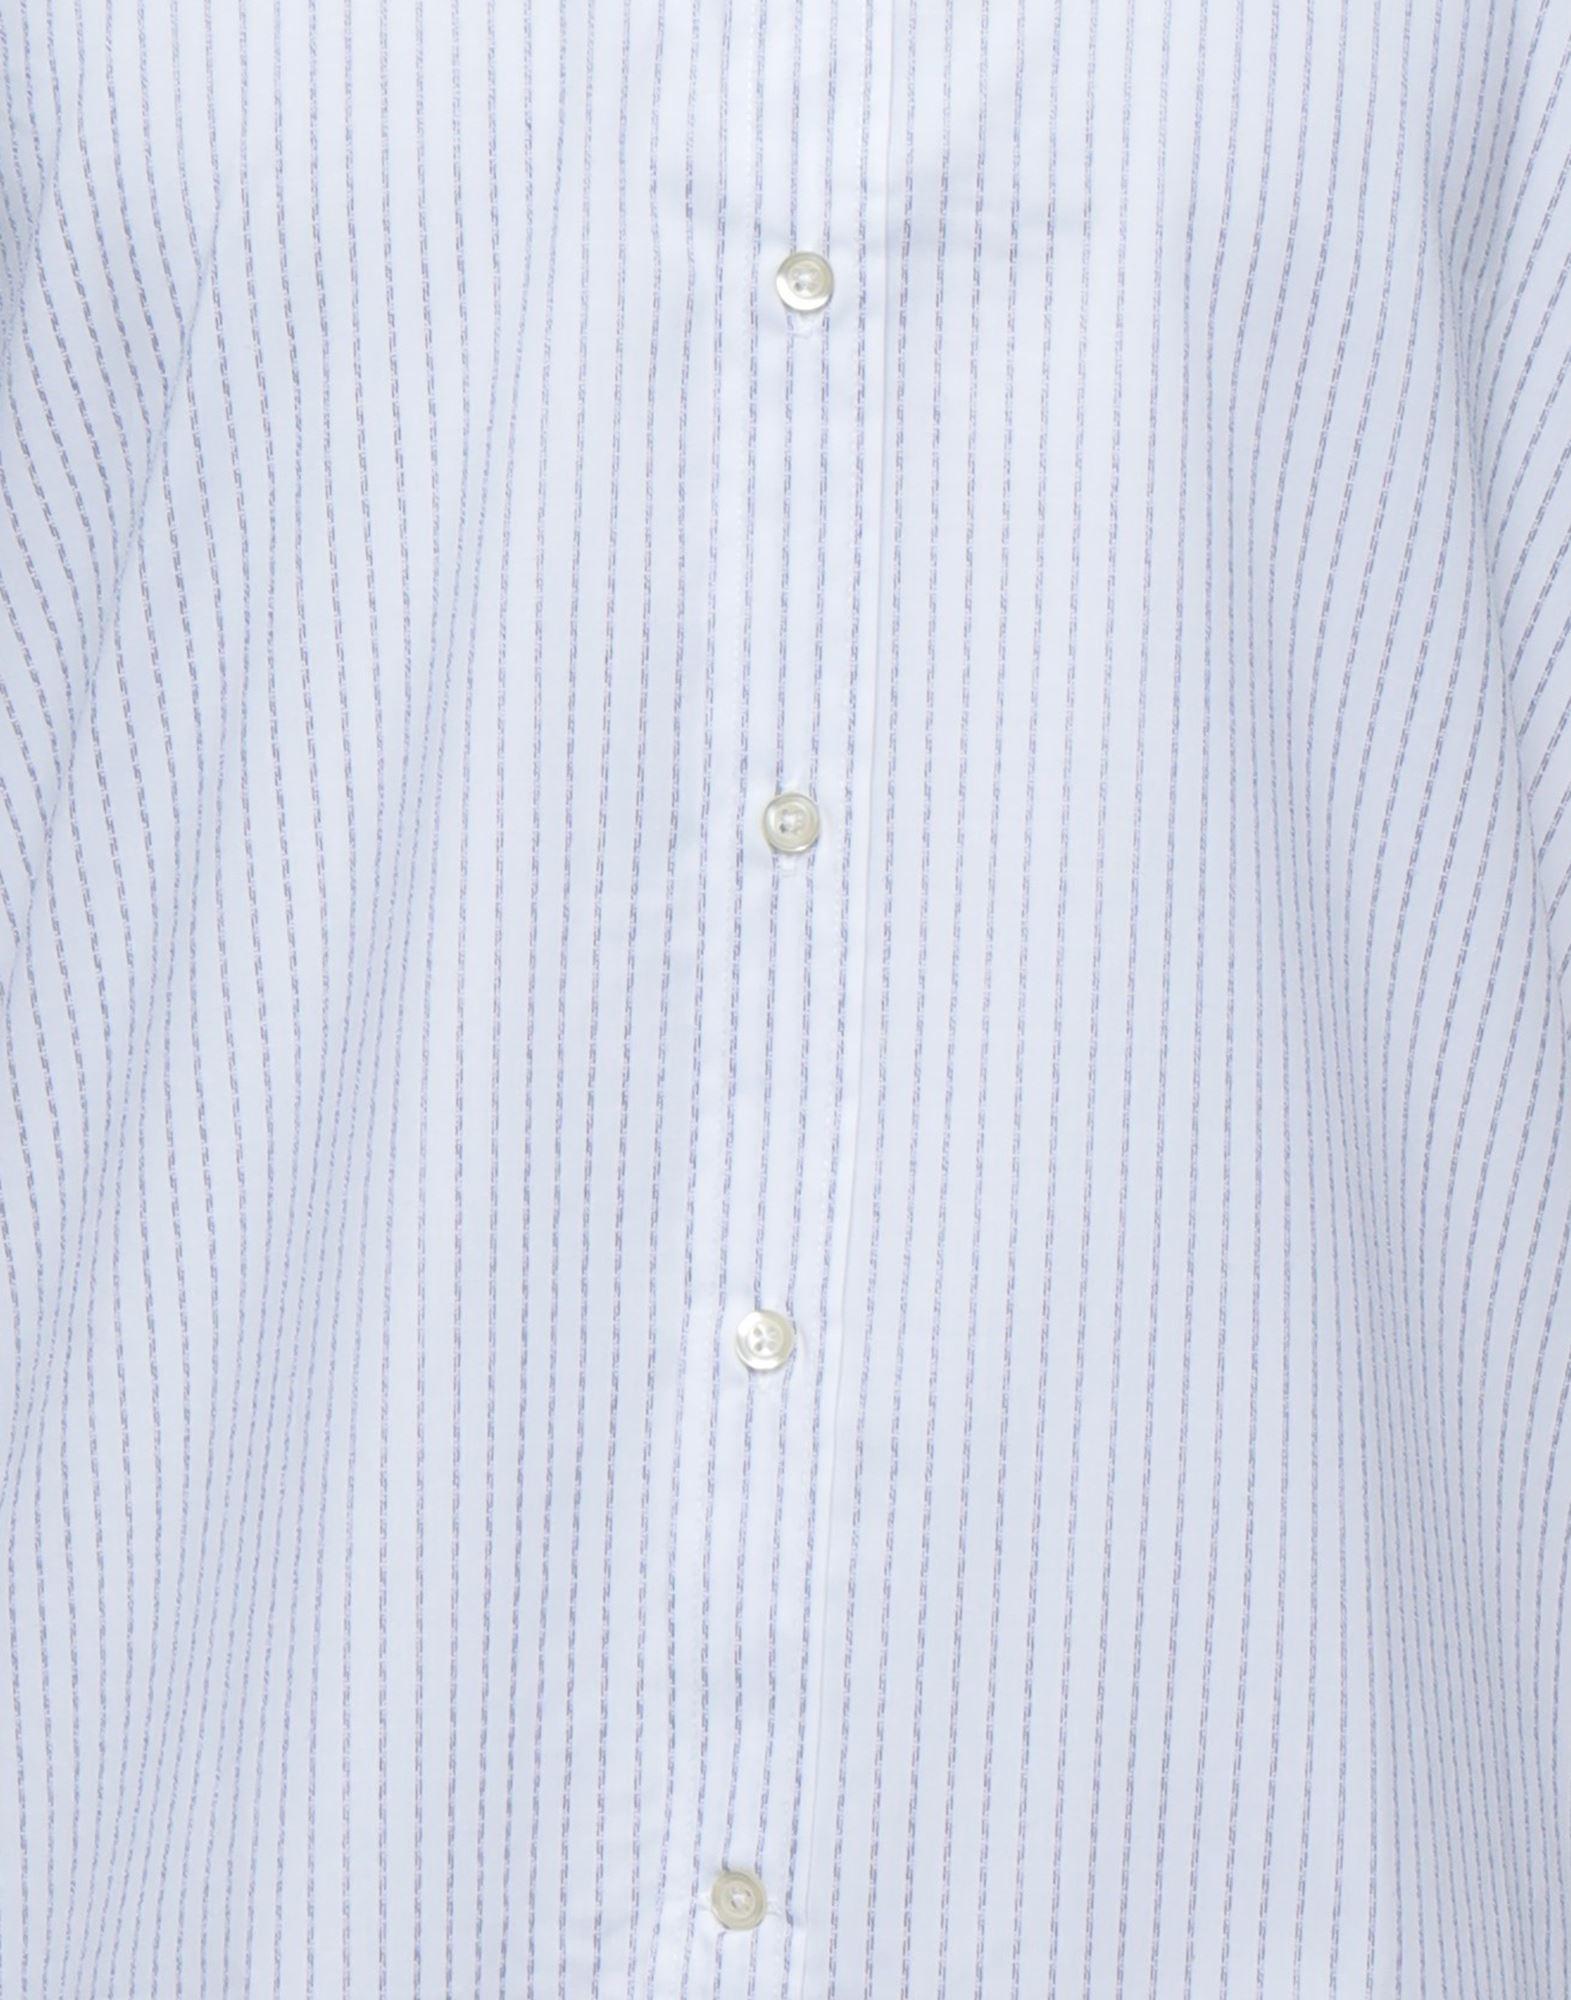 Brooksfield Cotton Shirt in White for Men - Lyst